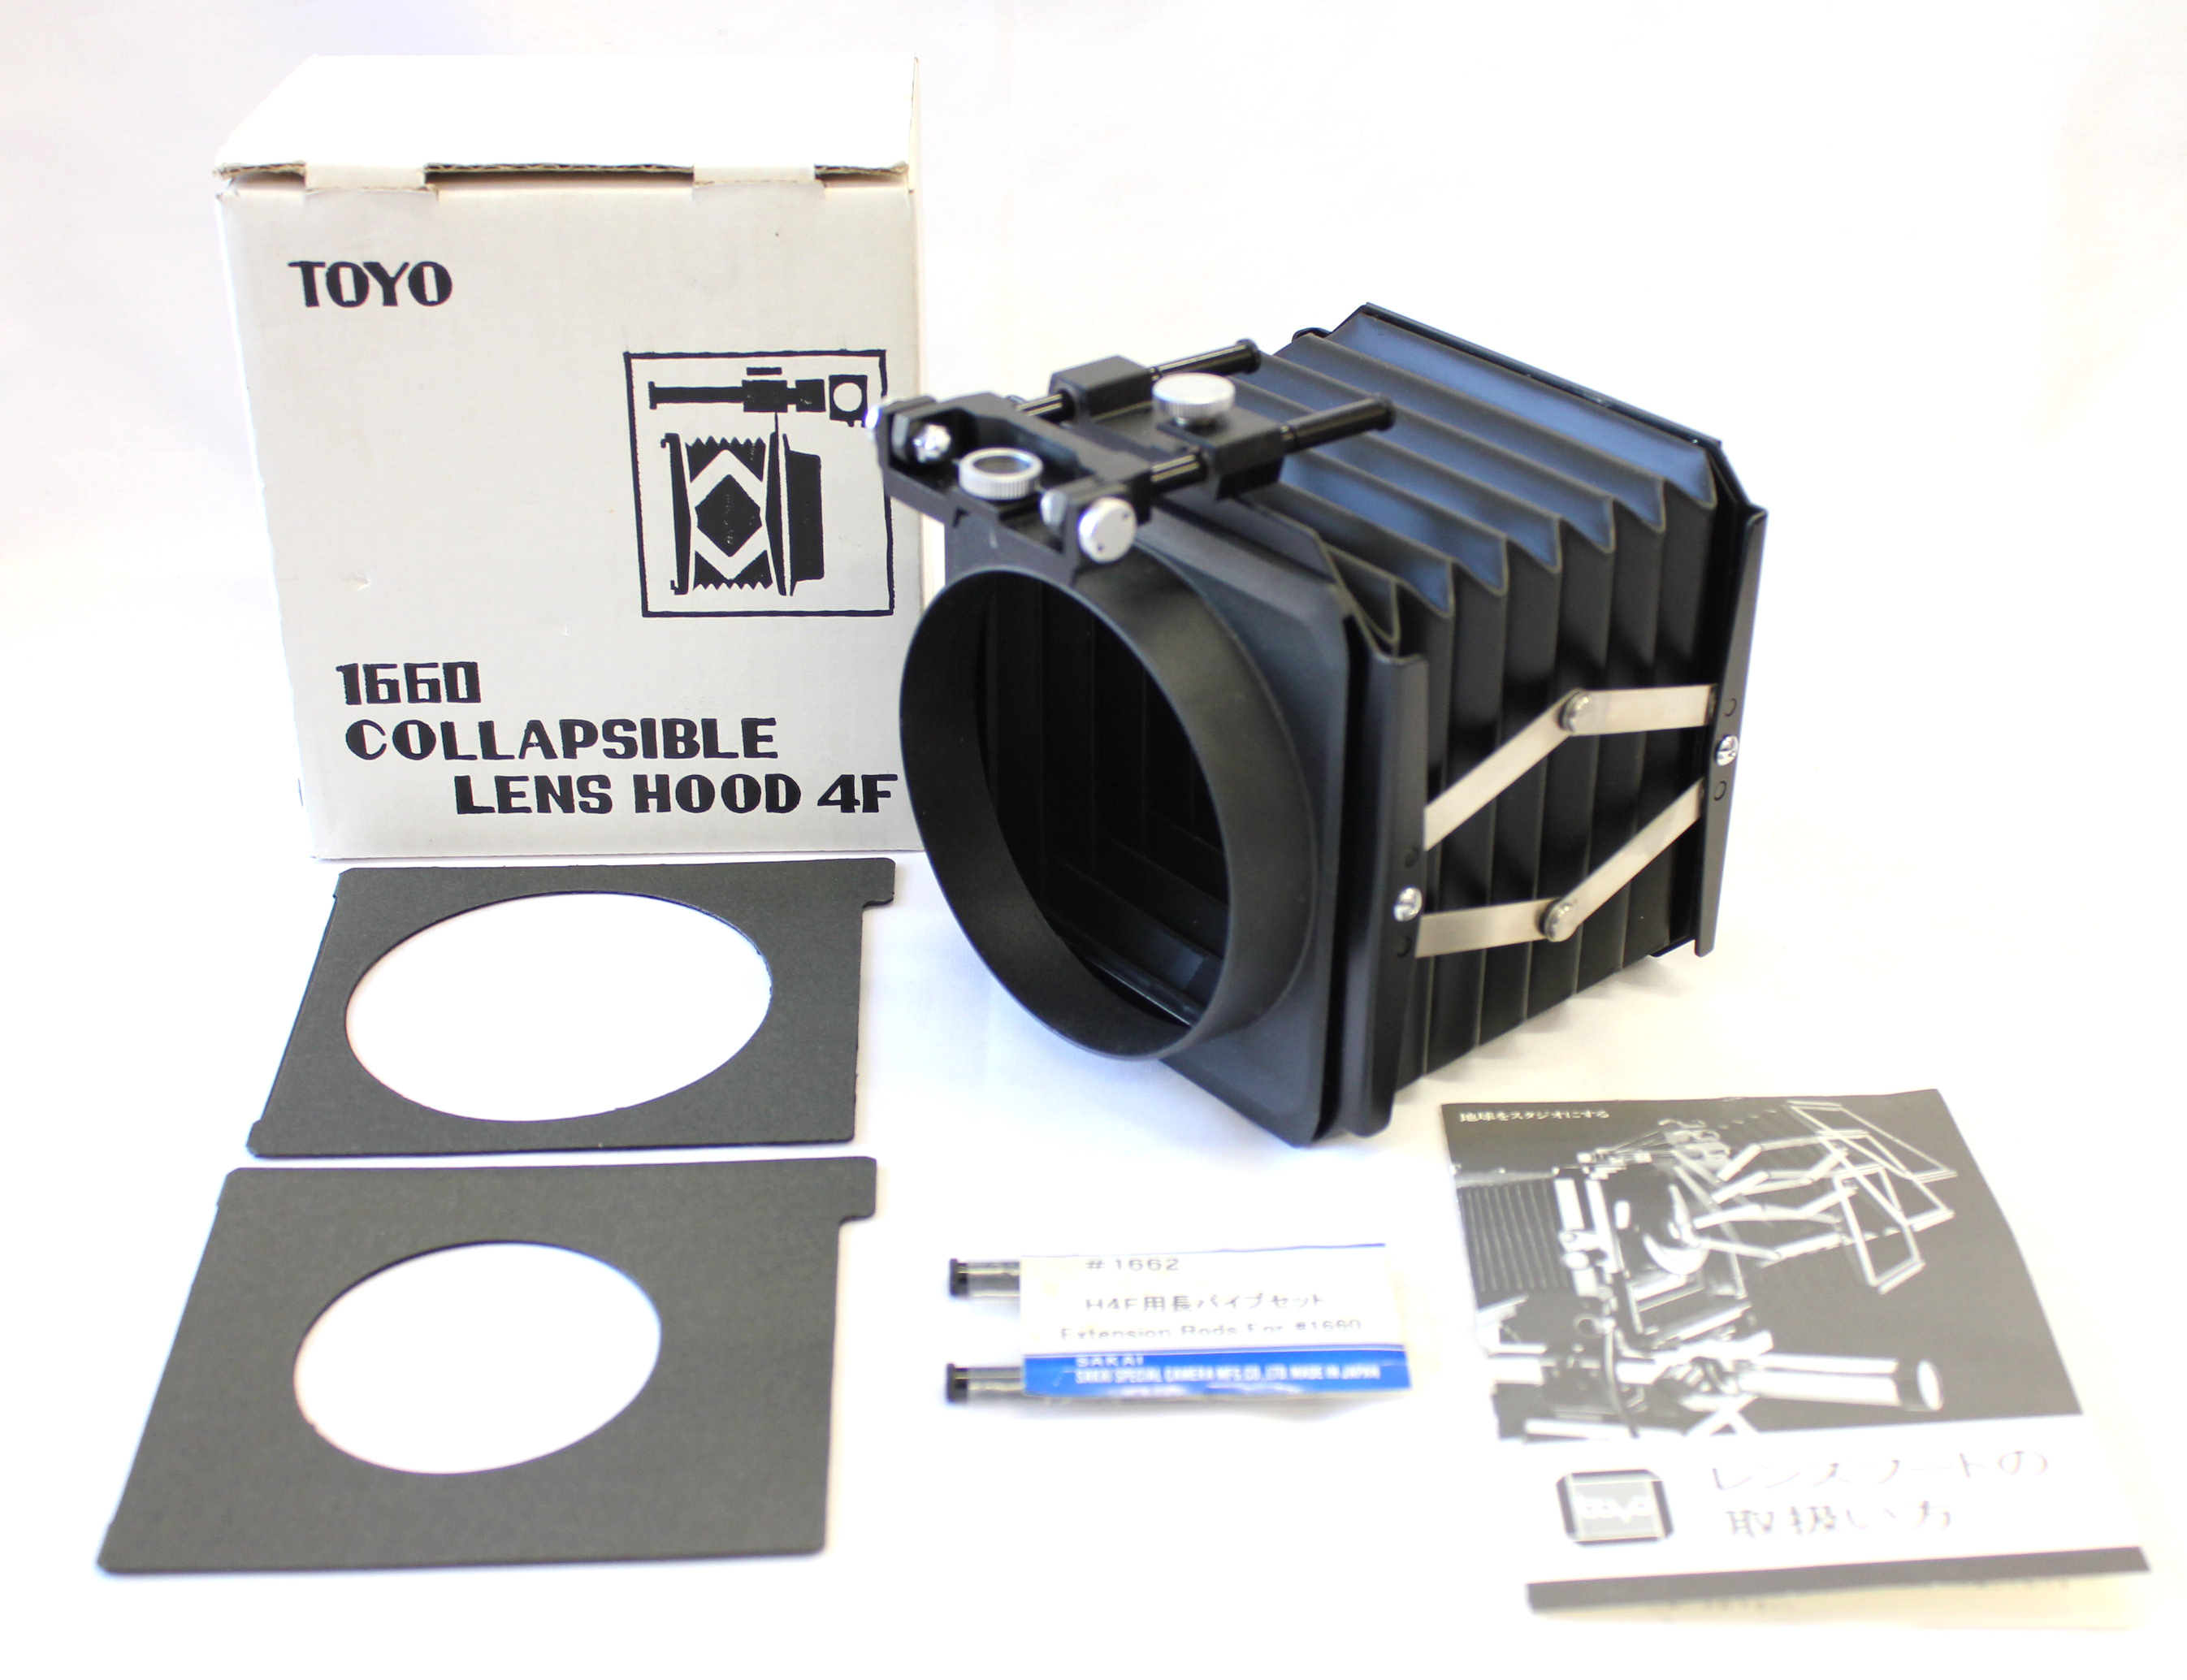 Japan Used Camera Shop | [Near Mint] Toyo Collapsible Lens Hood Bellows H4F #1660 with Extension Rod for Toyo Field 45A 45A II from Japan